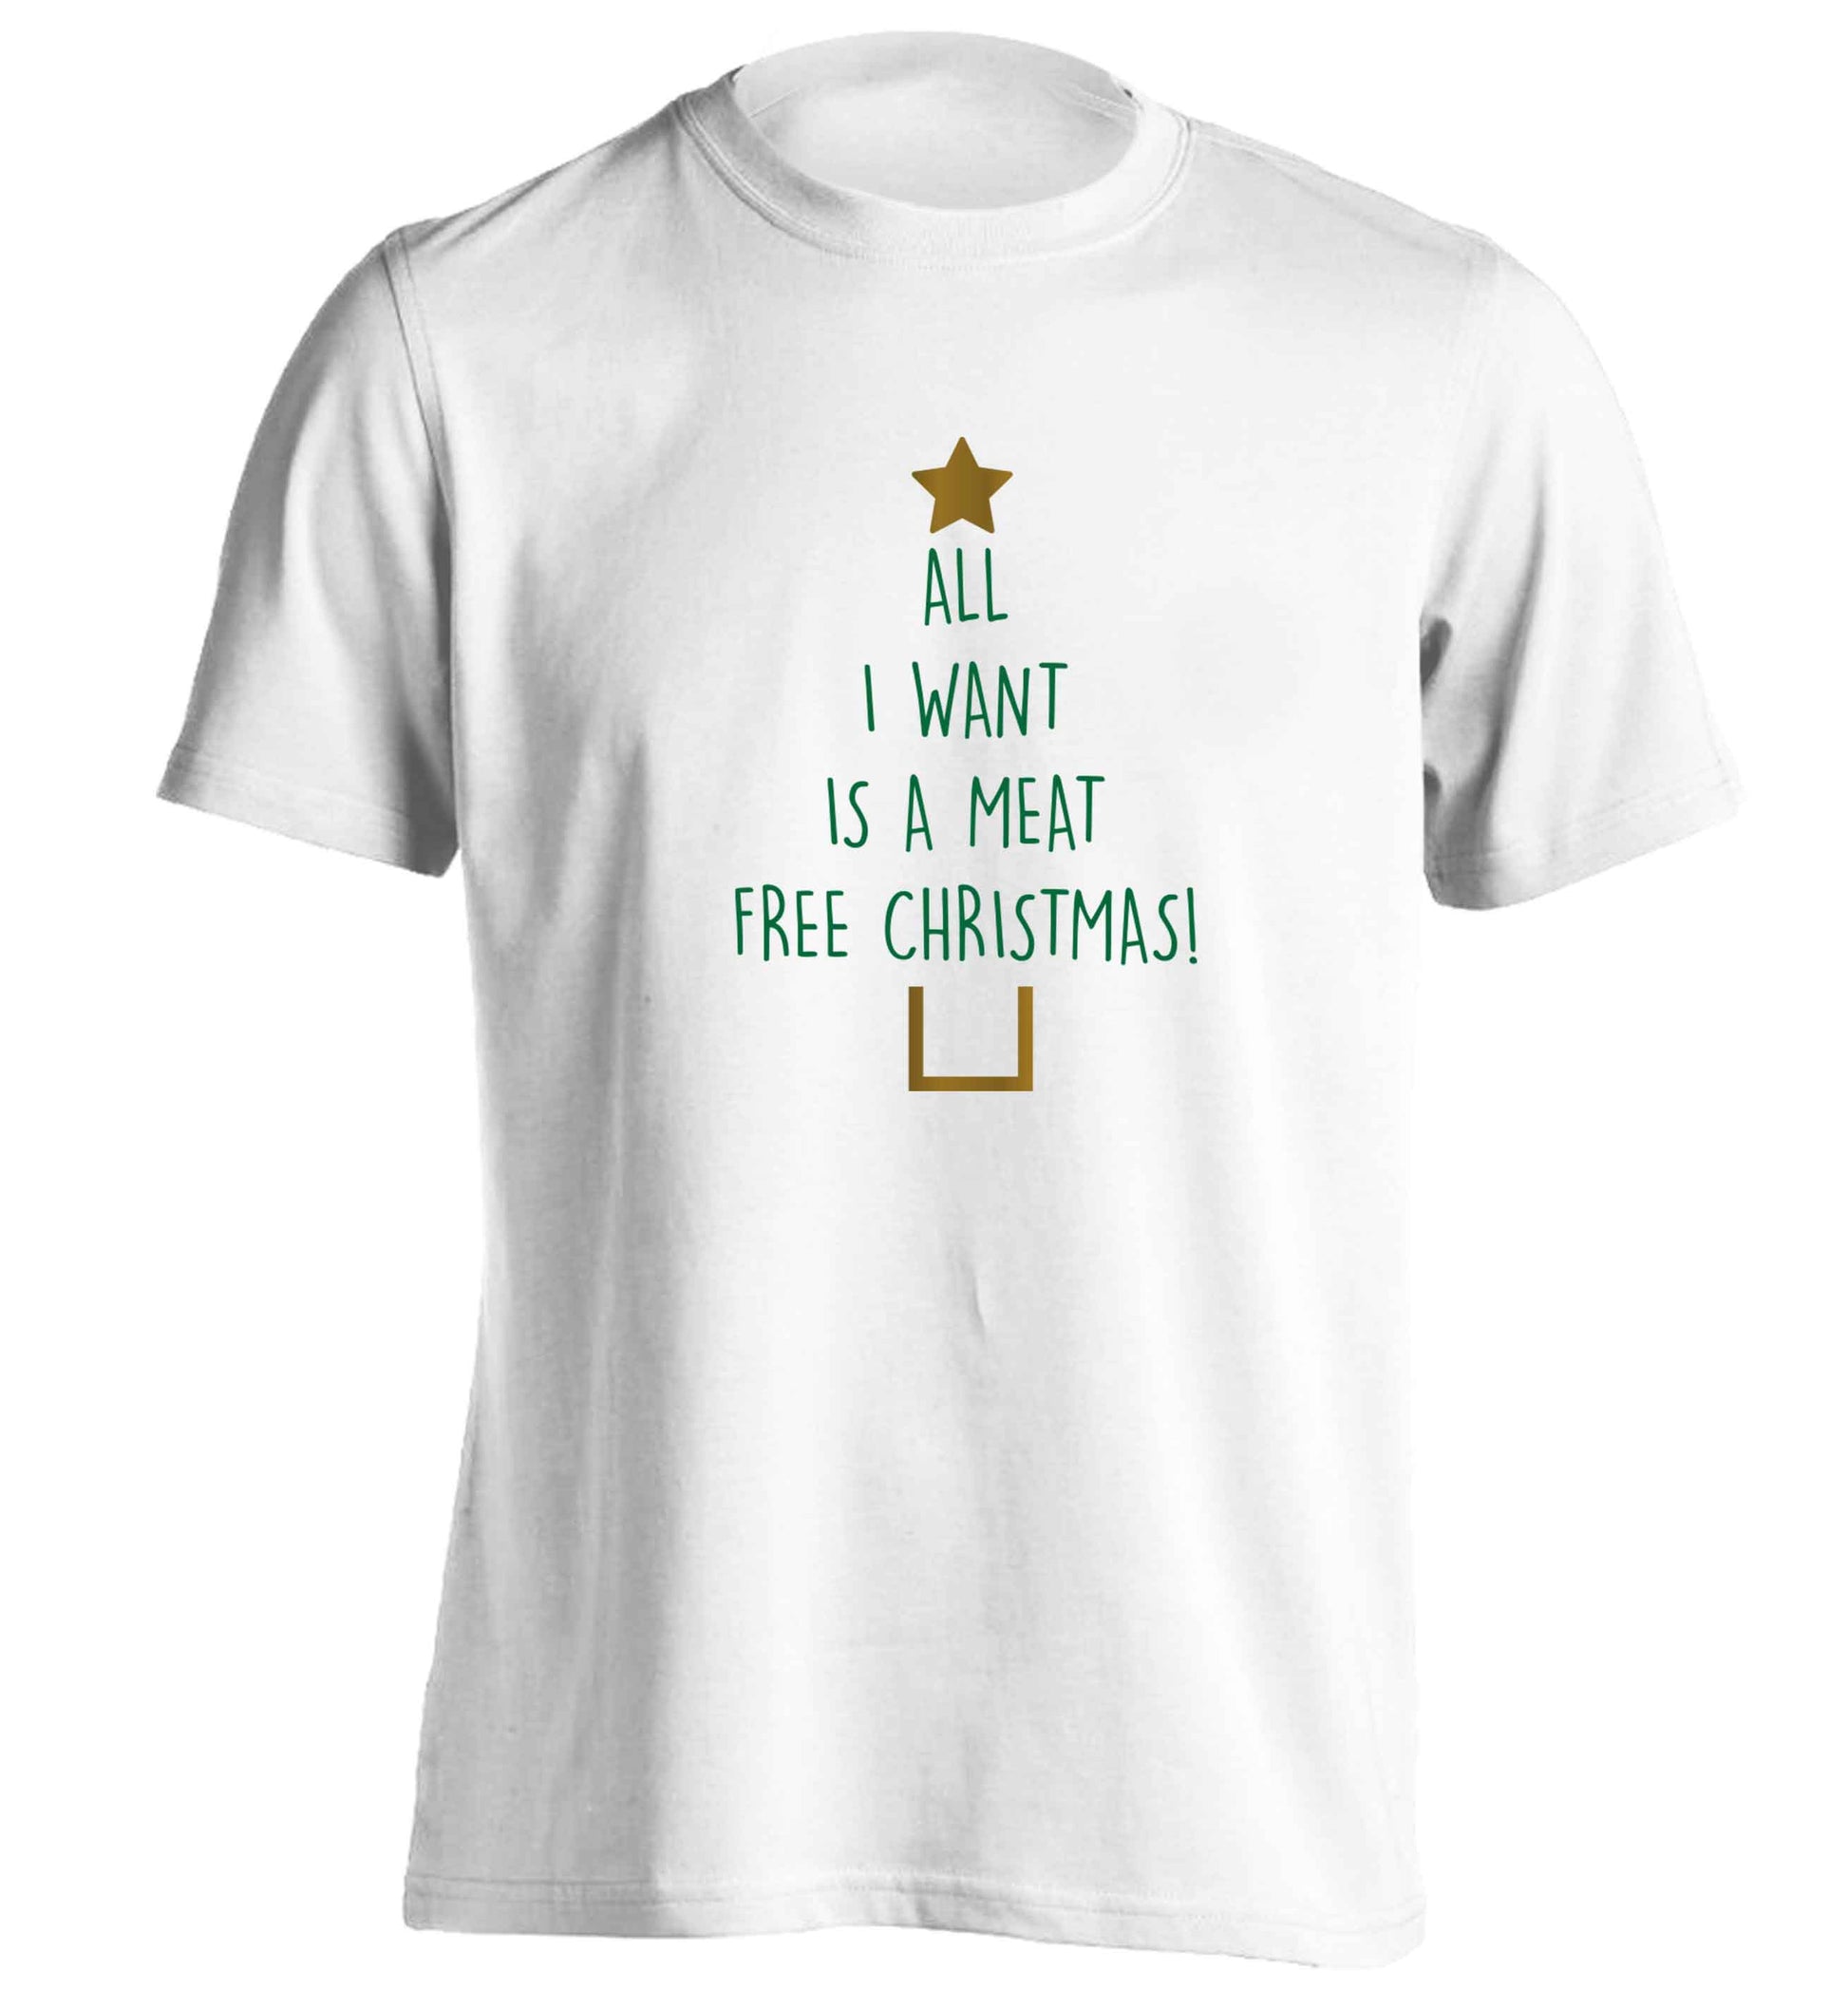 All I want is a meat free Christmas adults unisex white Tshirt 2XL